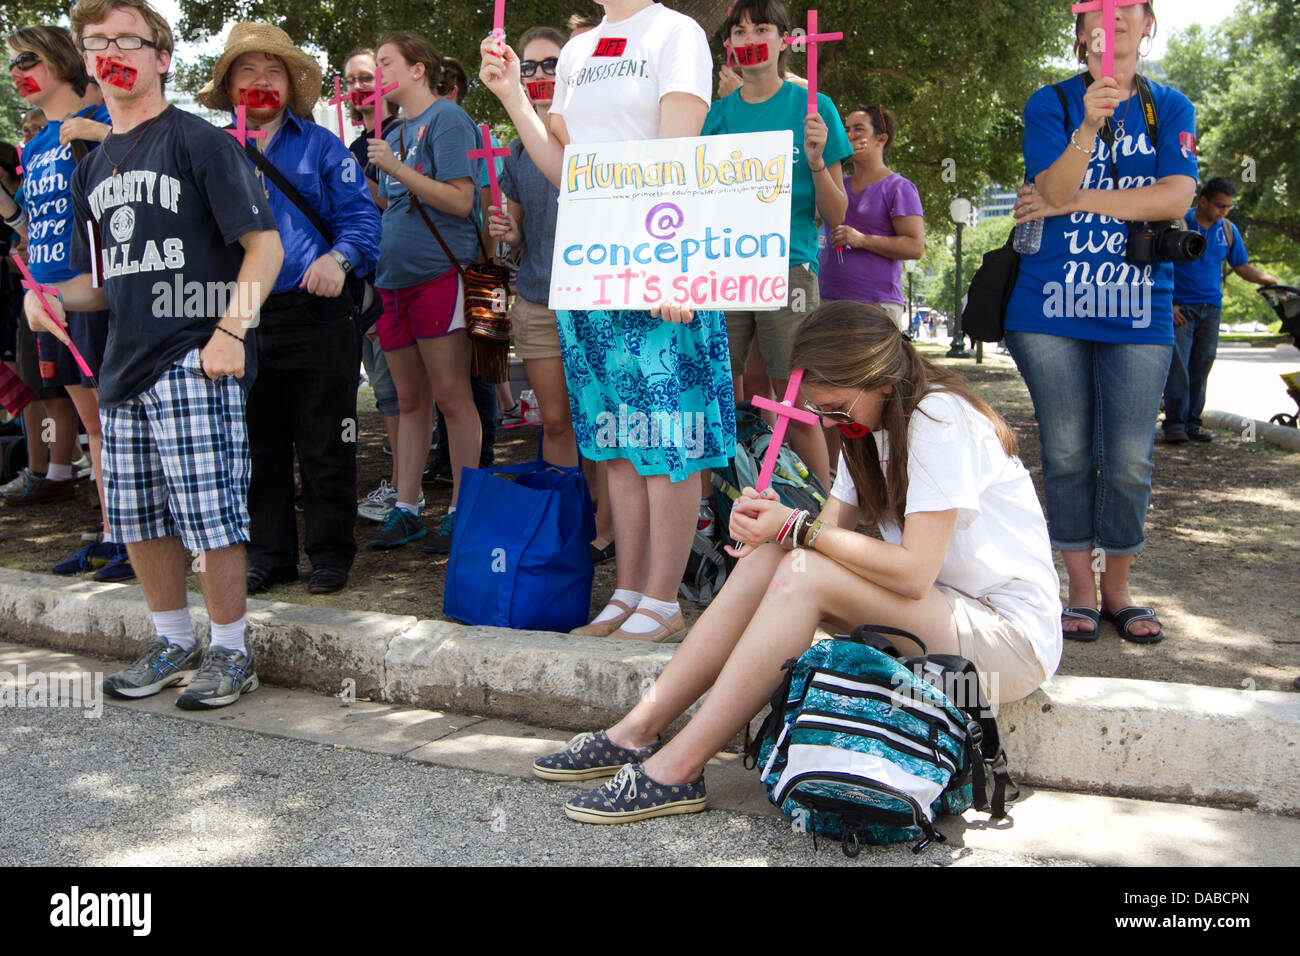 Pro-life anti-abortion groups some faith-based, rally and attend protests to voice their concerns with abortion laws in Texas. Stock Photo